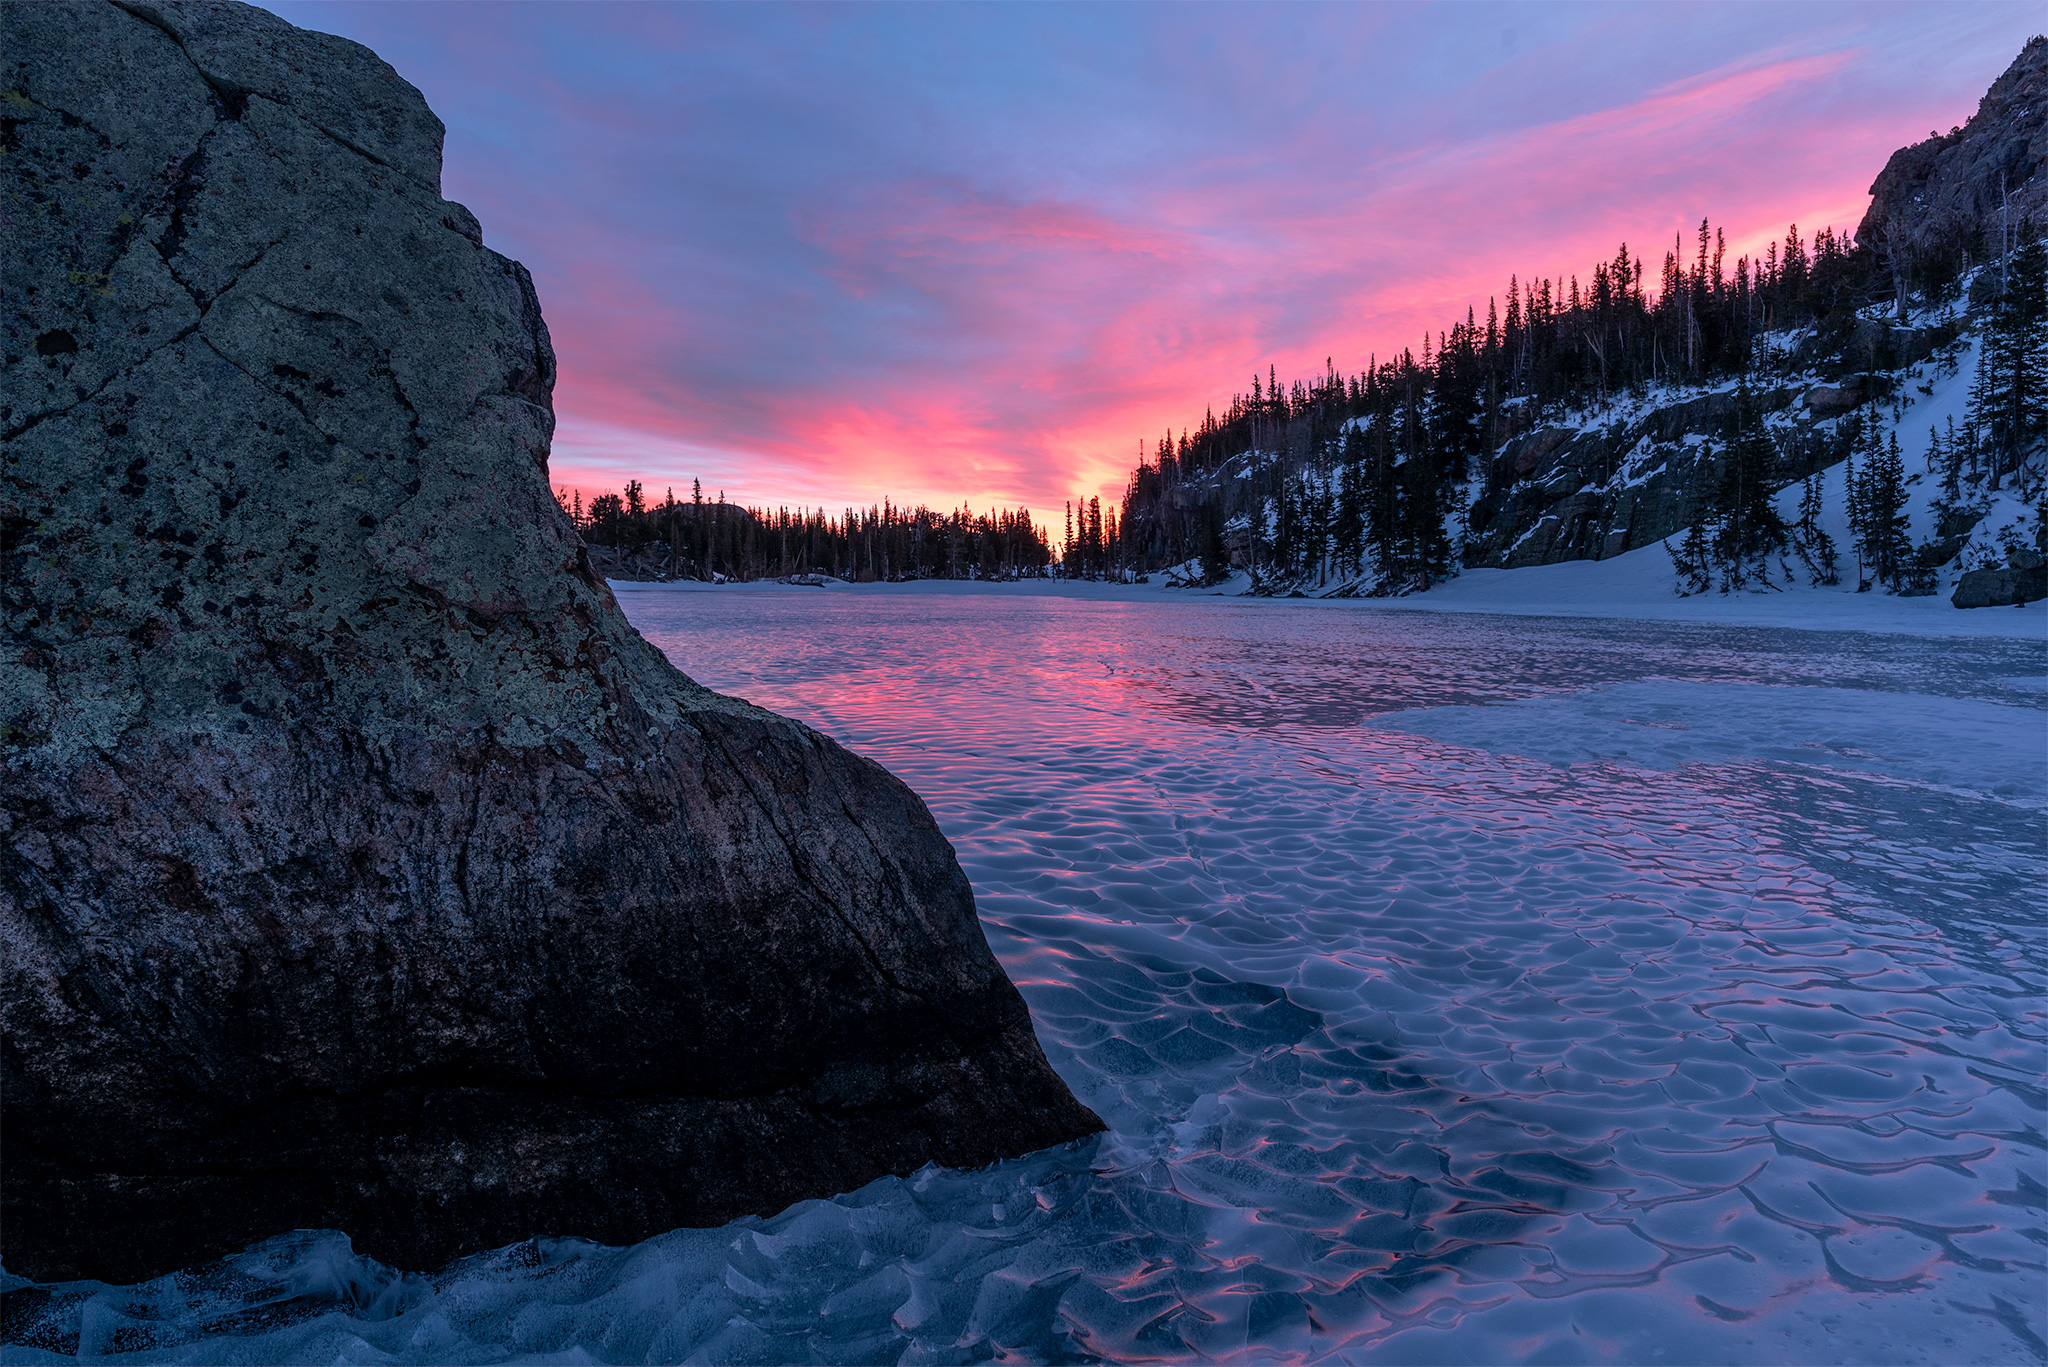 Peaking sunrise looking north at the Loch Vale in Rocky Mountain National Park, frozen apline lake